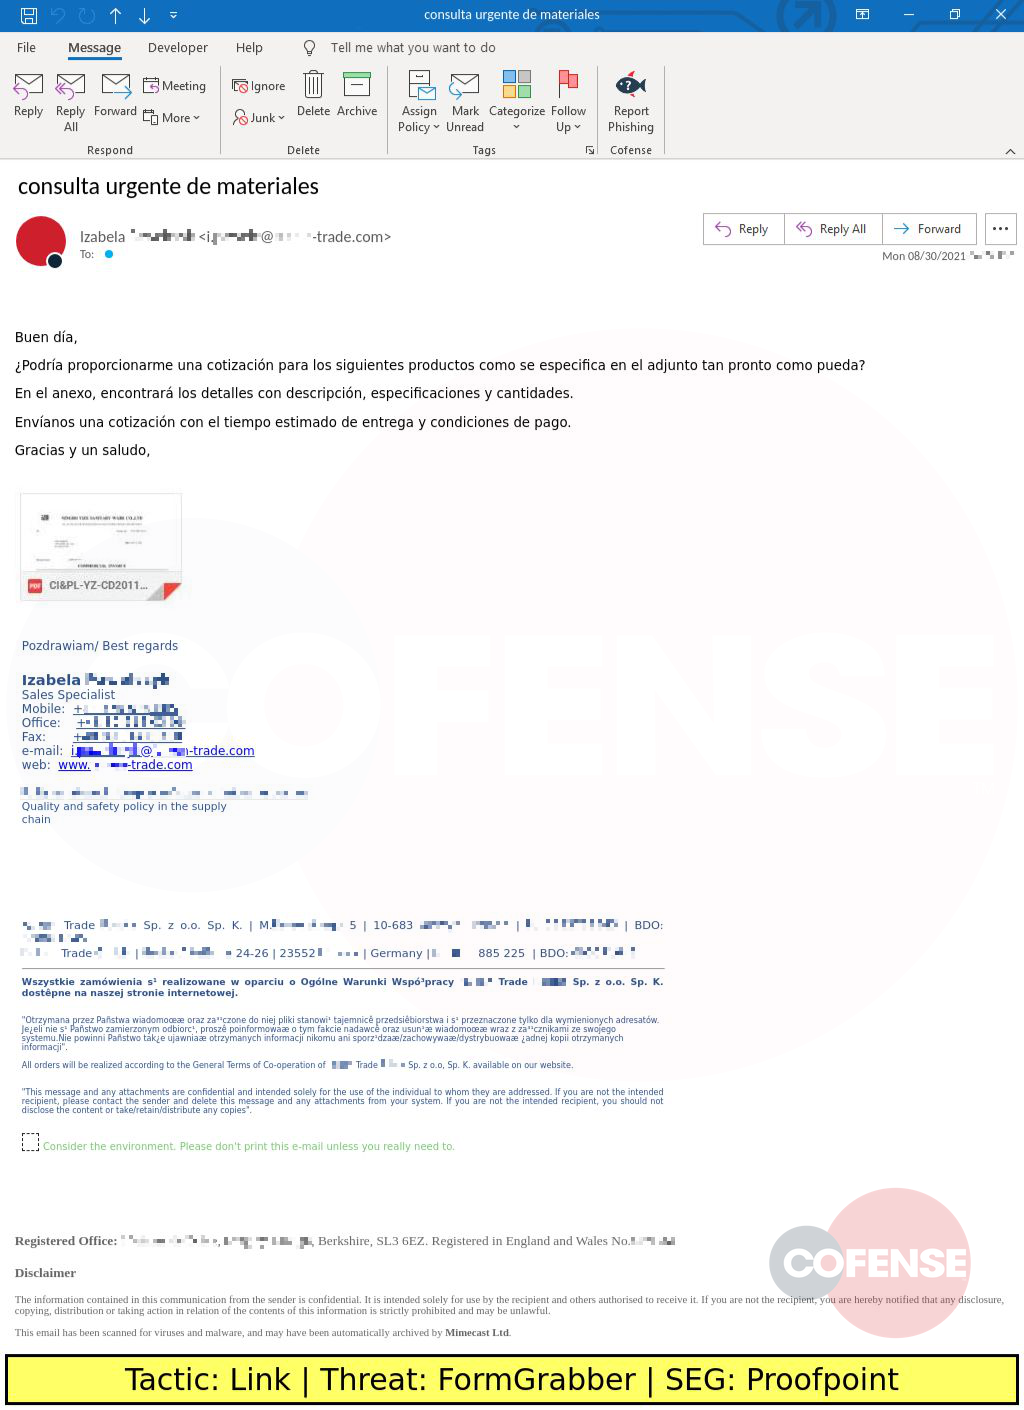 Real Phishing Example: Finance-themed emails found in environments protected by Proofpoint deliver FormGrabber via an embedded link which downloaded AutoIT Loader. AutoIT Loader then downloaded FormGrabber and executed it in memory.